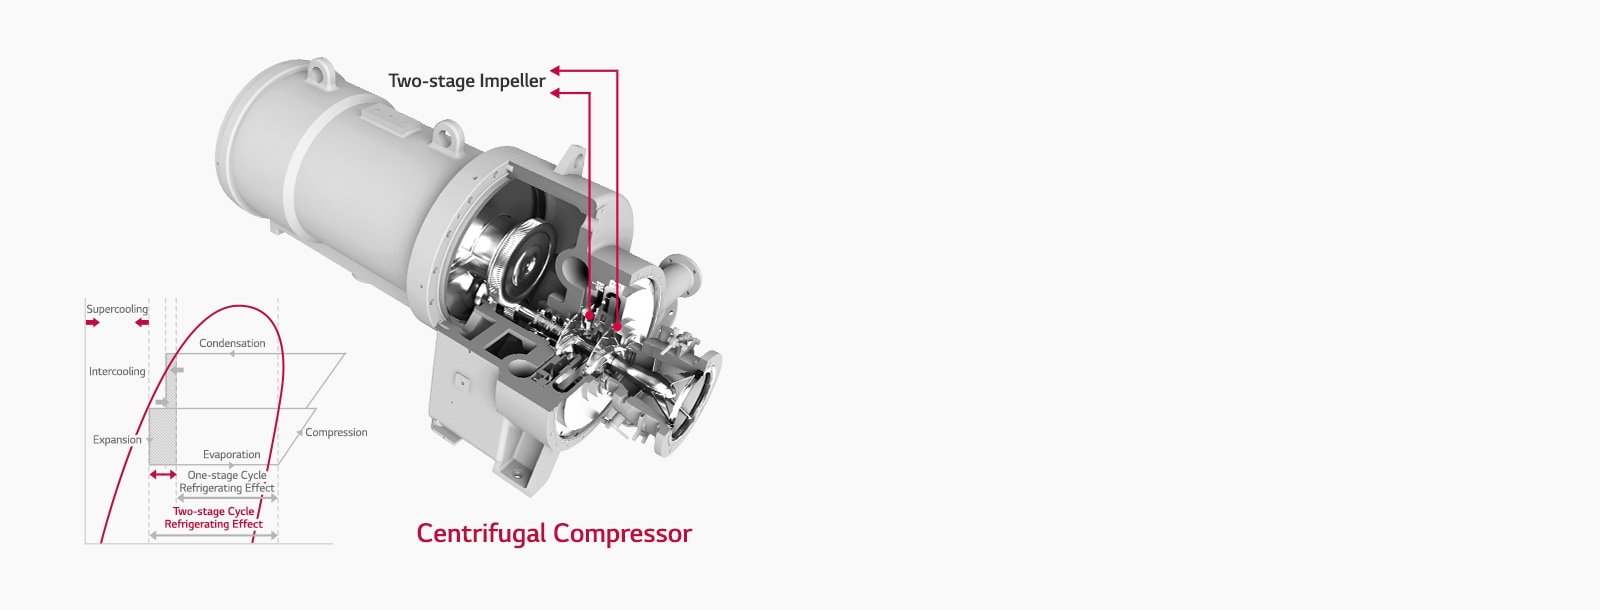 High Efficiency Two-stage Compressor